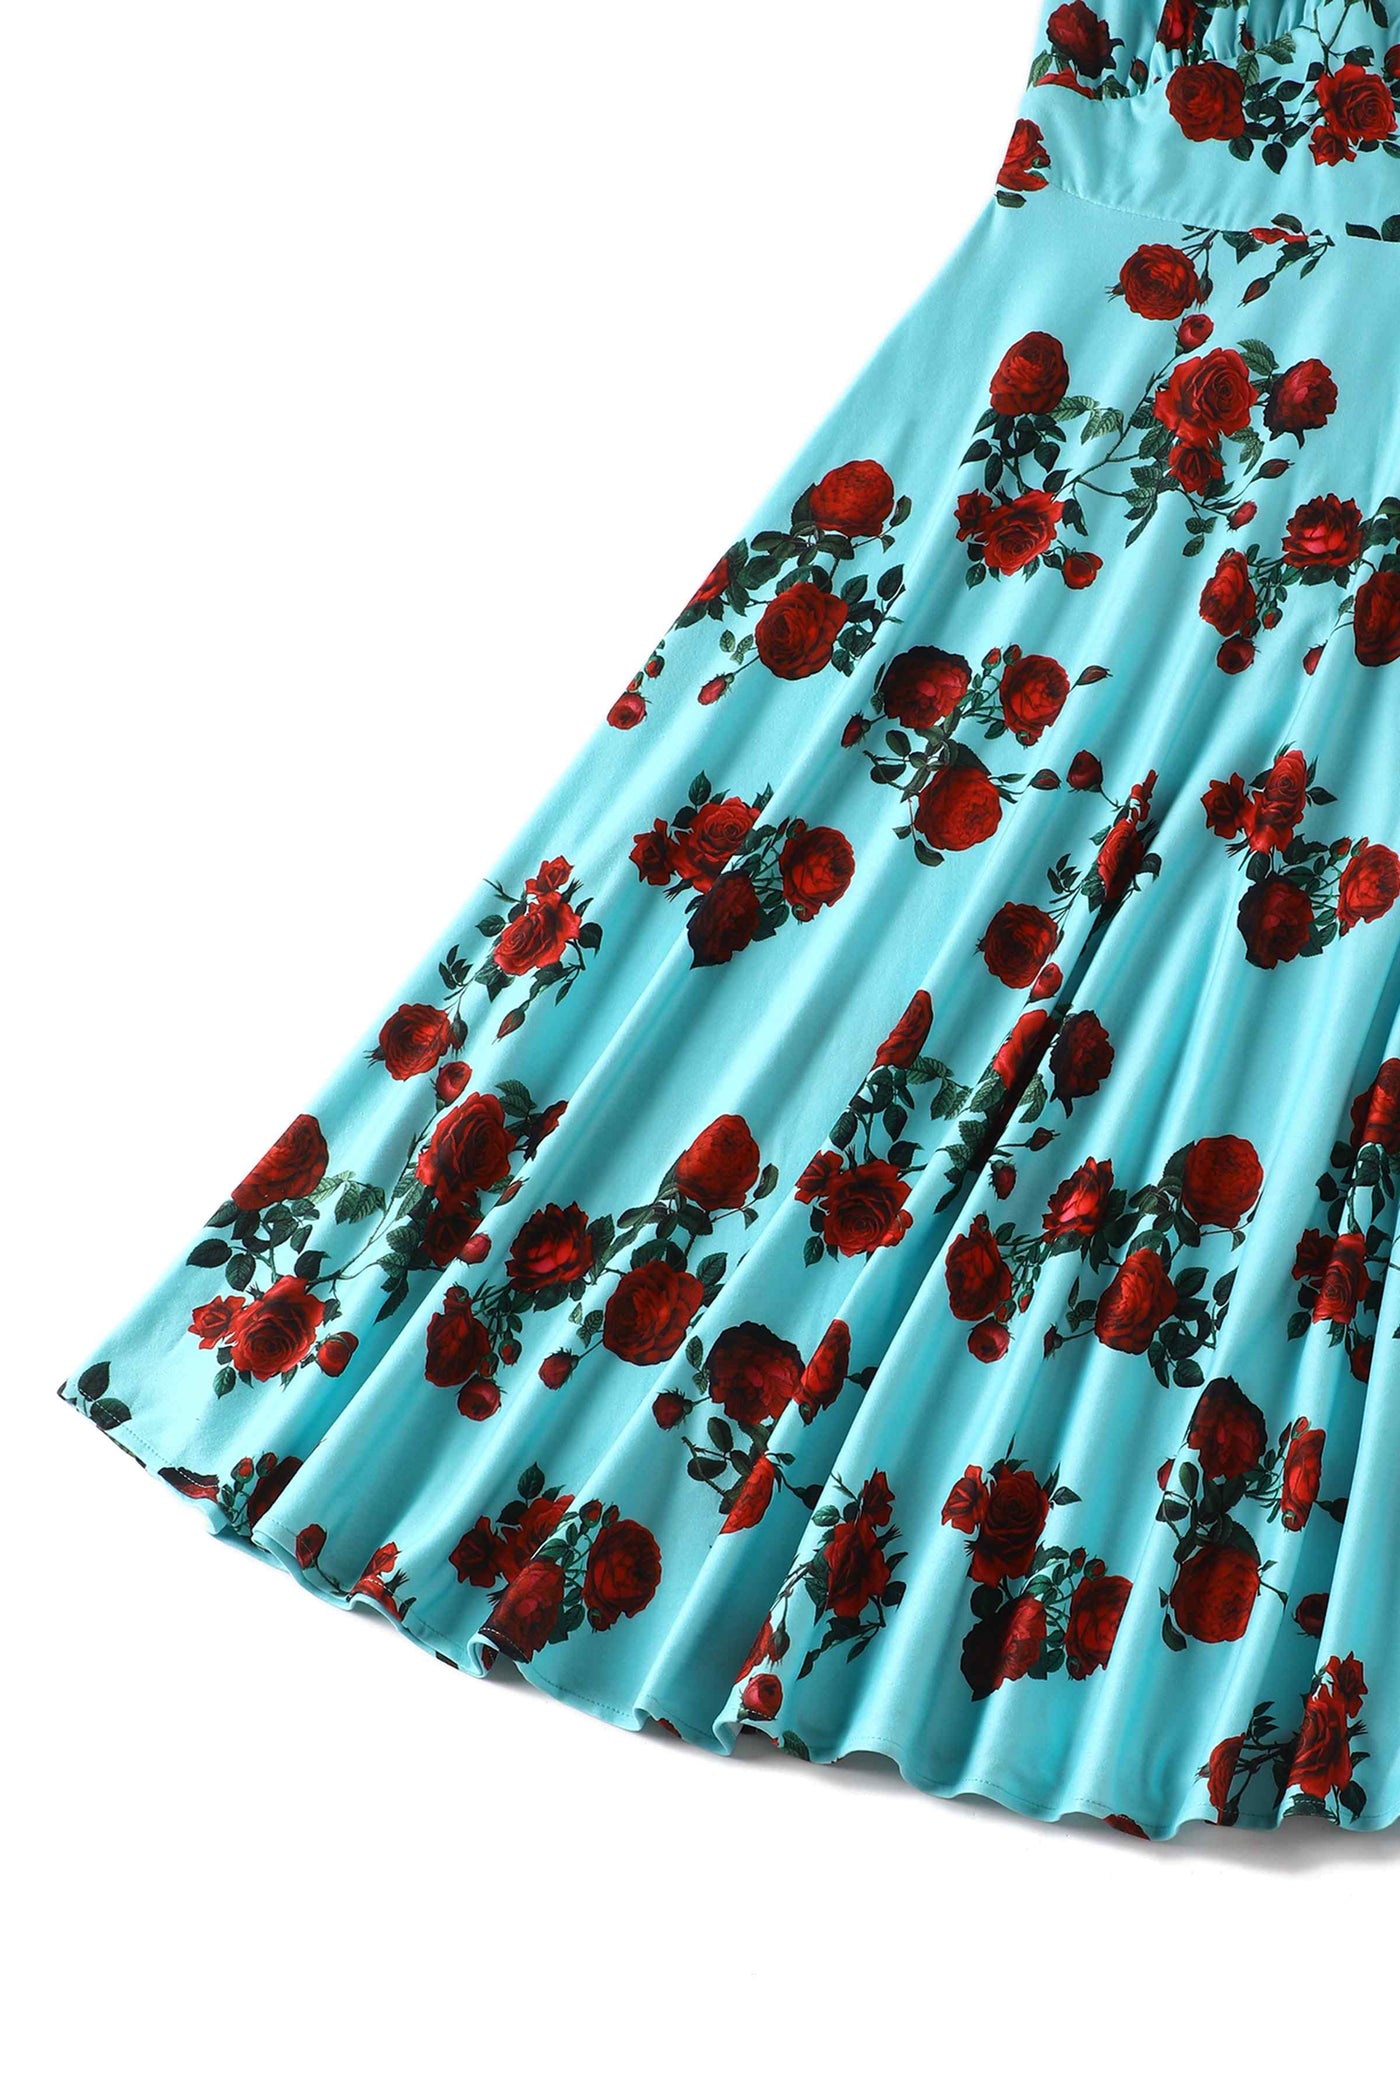 50s Style Red Rose Sleeved Dress in Blue